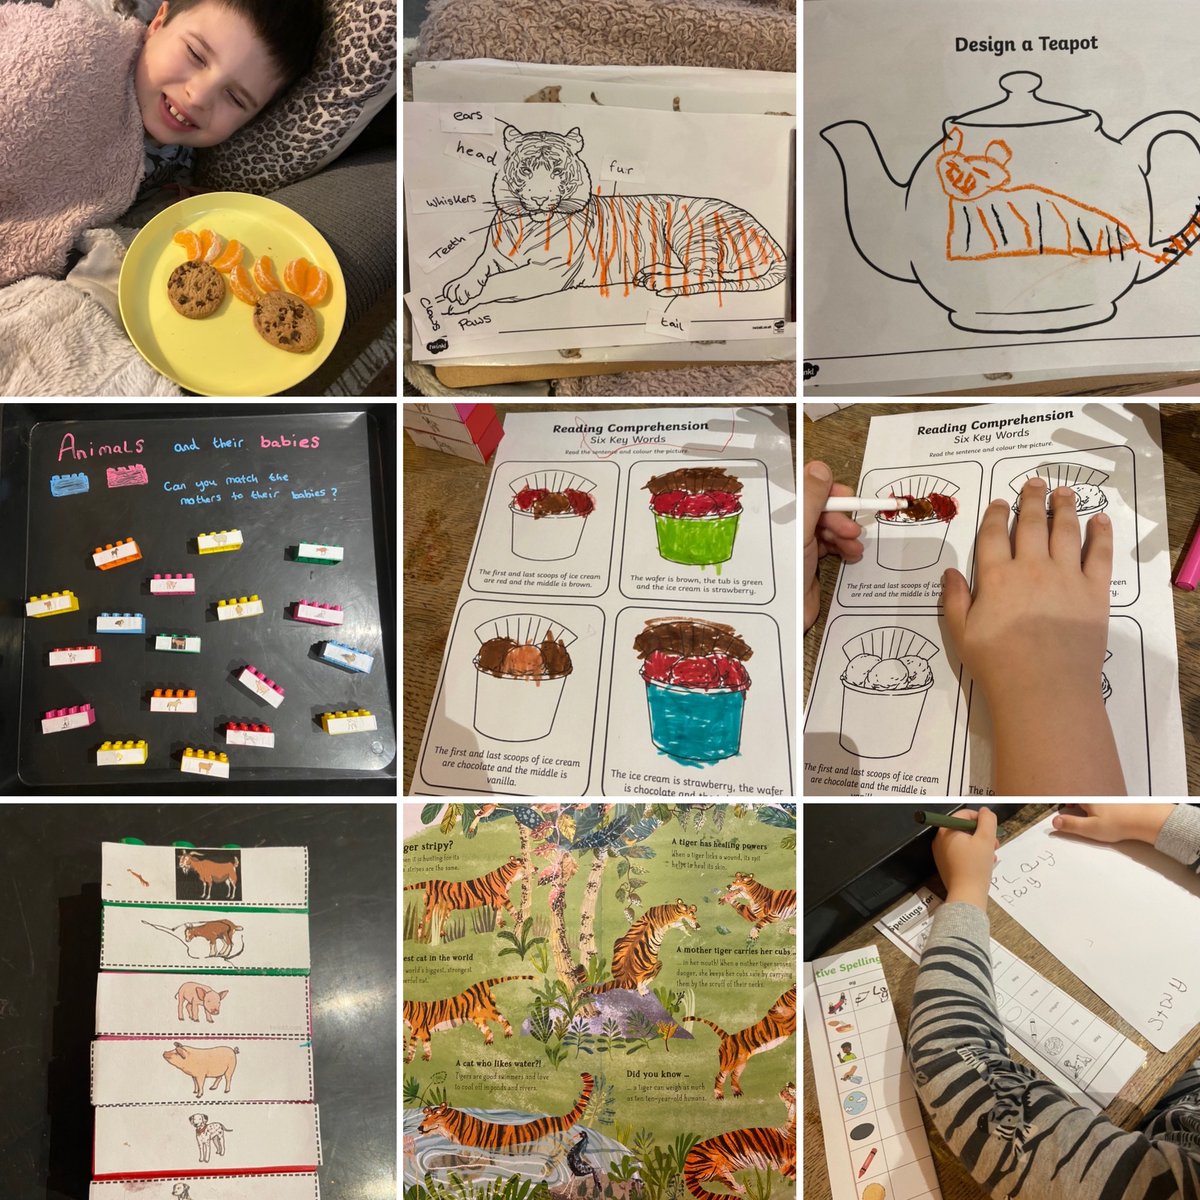 Some of our learning at home #homeschooling  💗🐅🎨📝 @TwinklParents #autismawareness #thetigerwhocametotea #Year2 #twinklresources #playbasedlearning